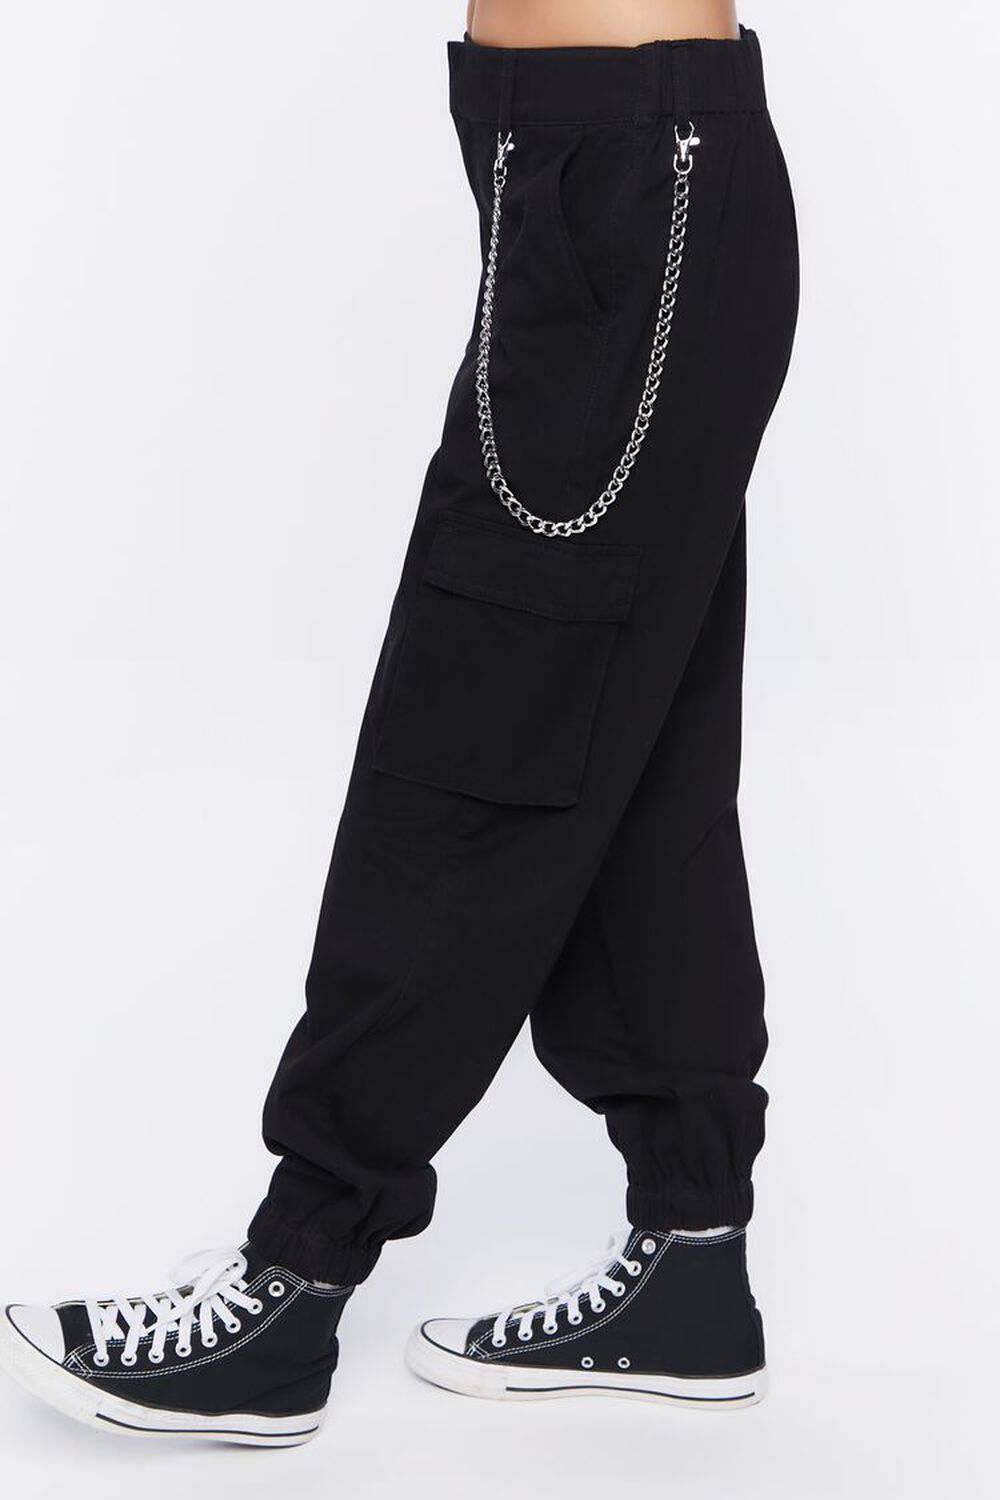 BLACK Wallet Chain Cargo Joggers, image 3